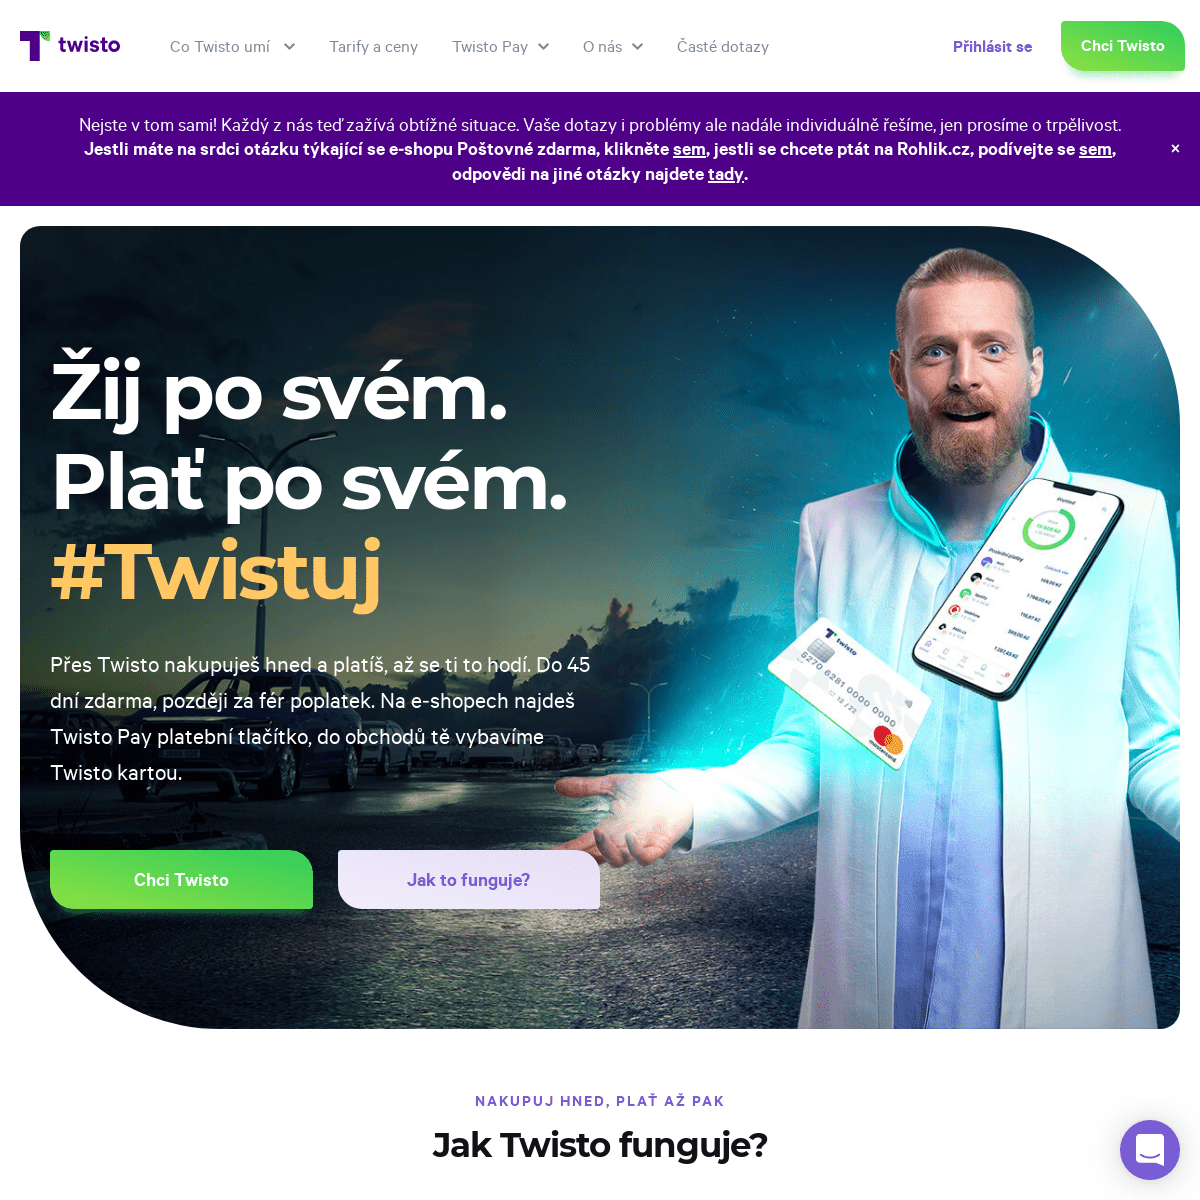 A complete backup of twisto.cz